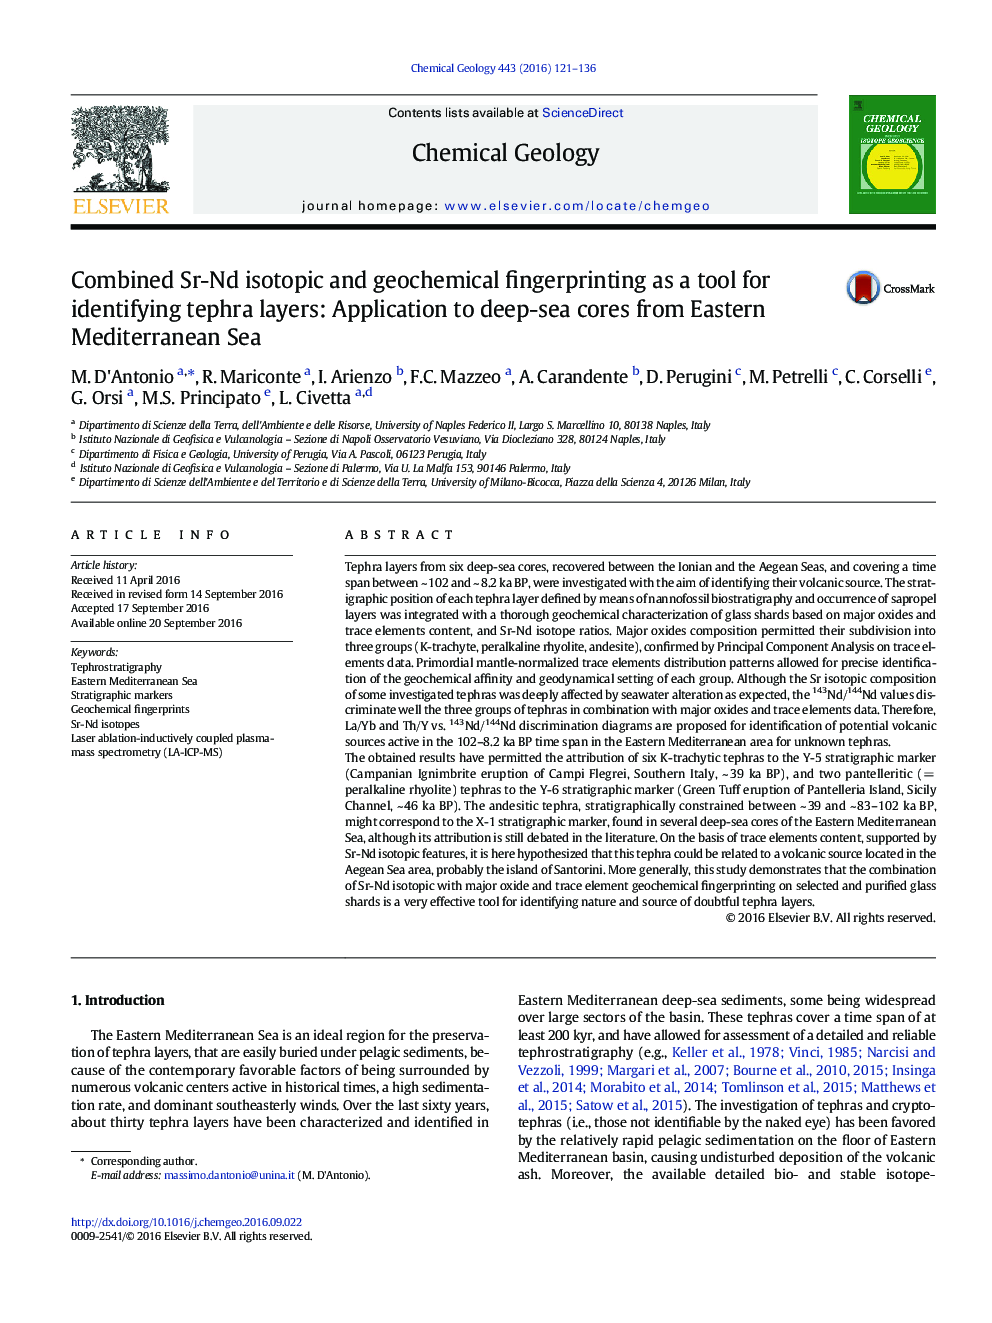 Combined Sr-Nd isotopic and geochemical fingerprinting as a tool for identifying tephra layers: Application to deep-sea cores from Eastern Mediterranean Sea